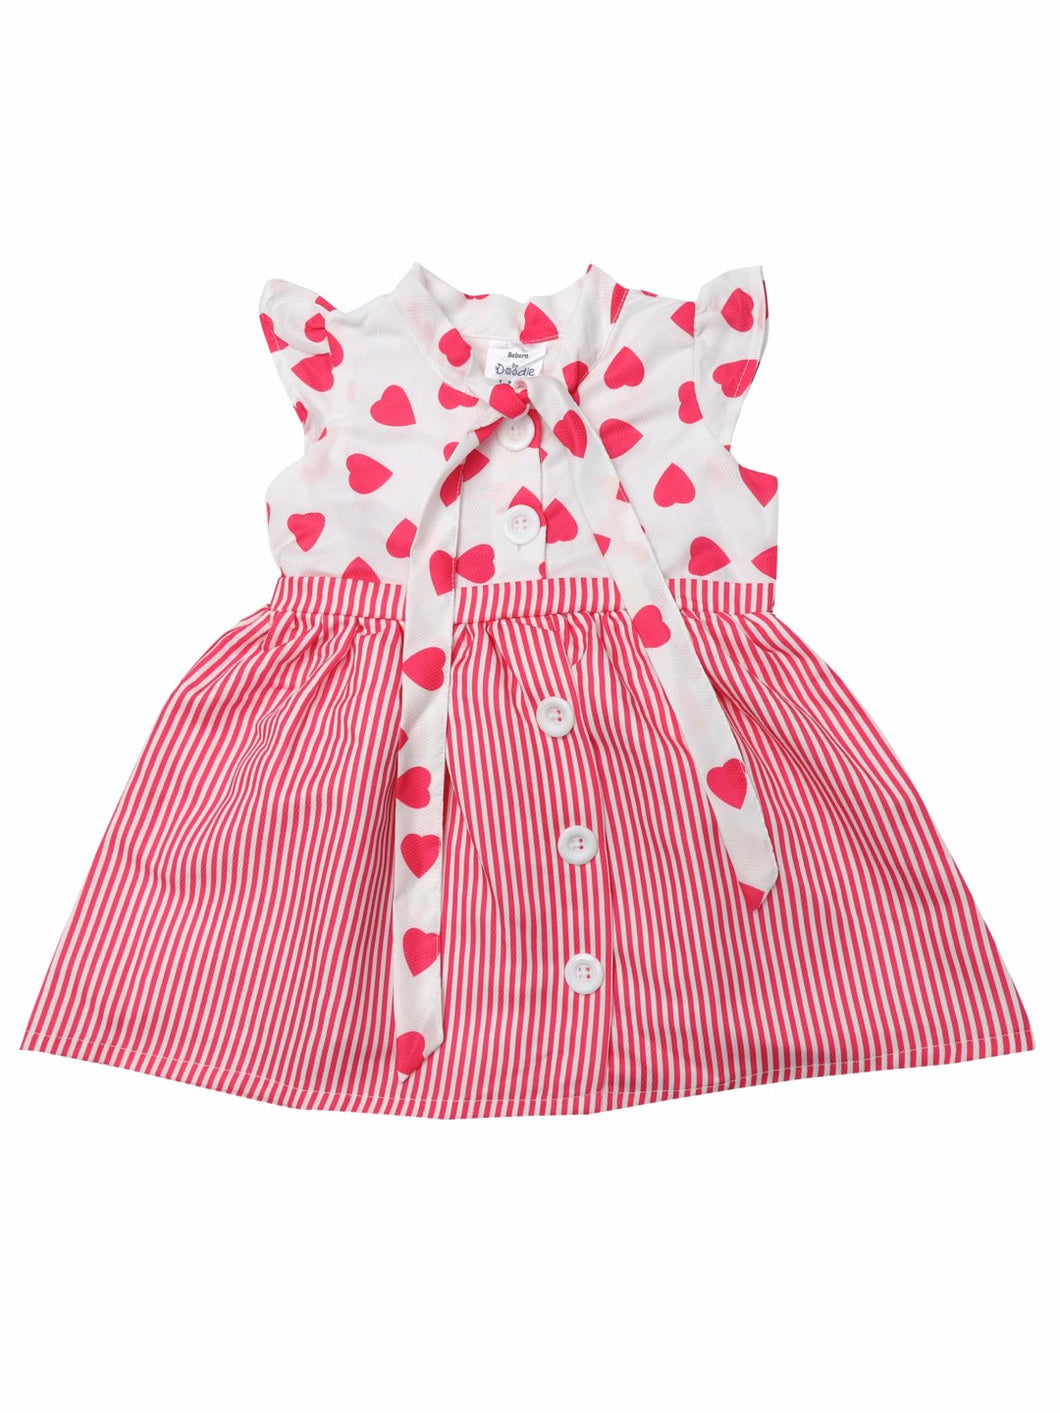 Pink With White Polka and Heart Printed Tie up Dress